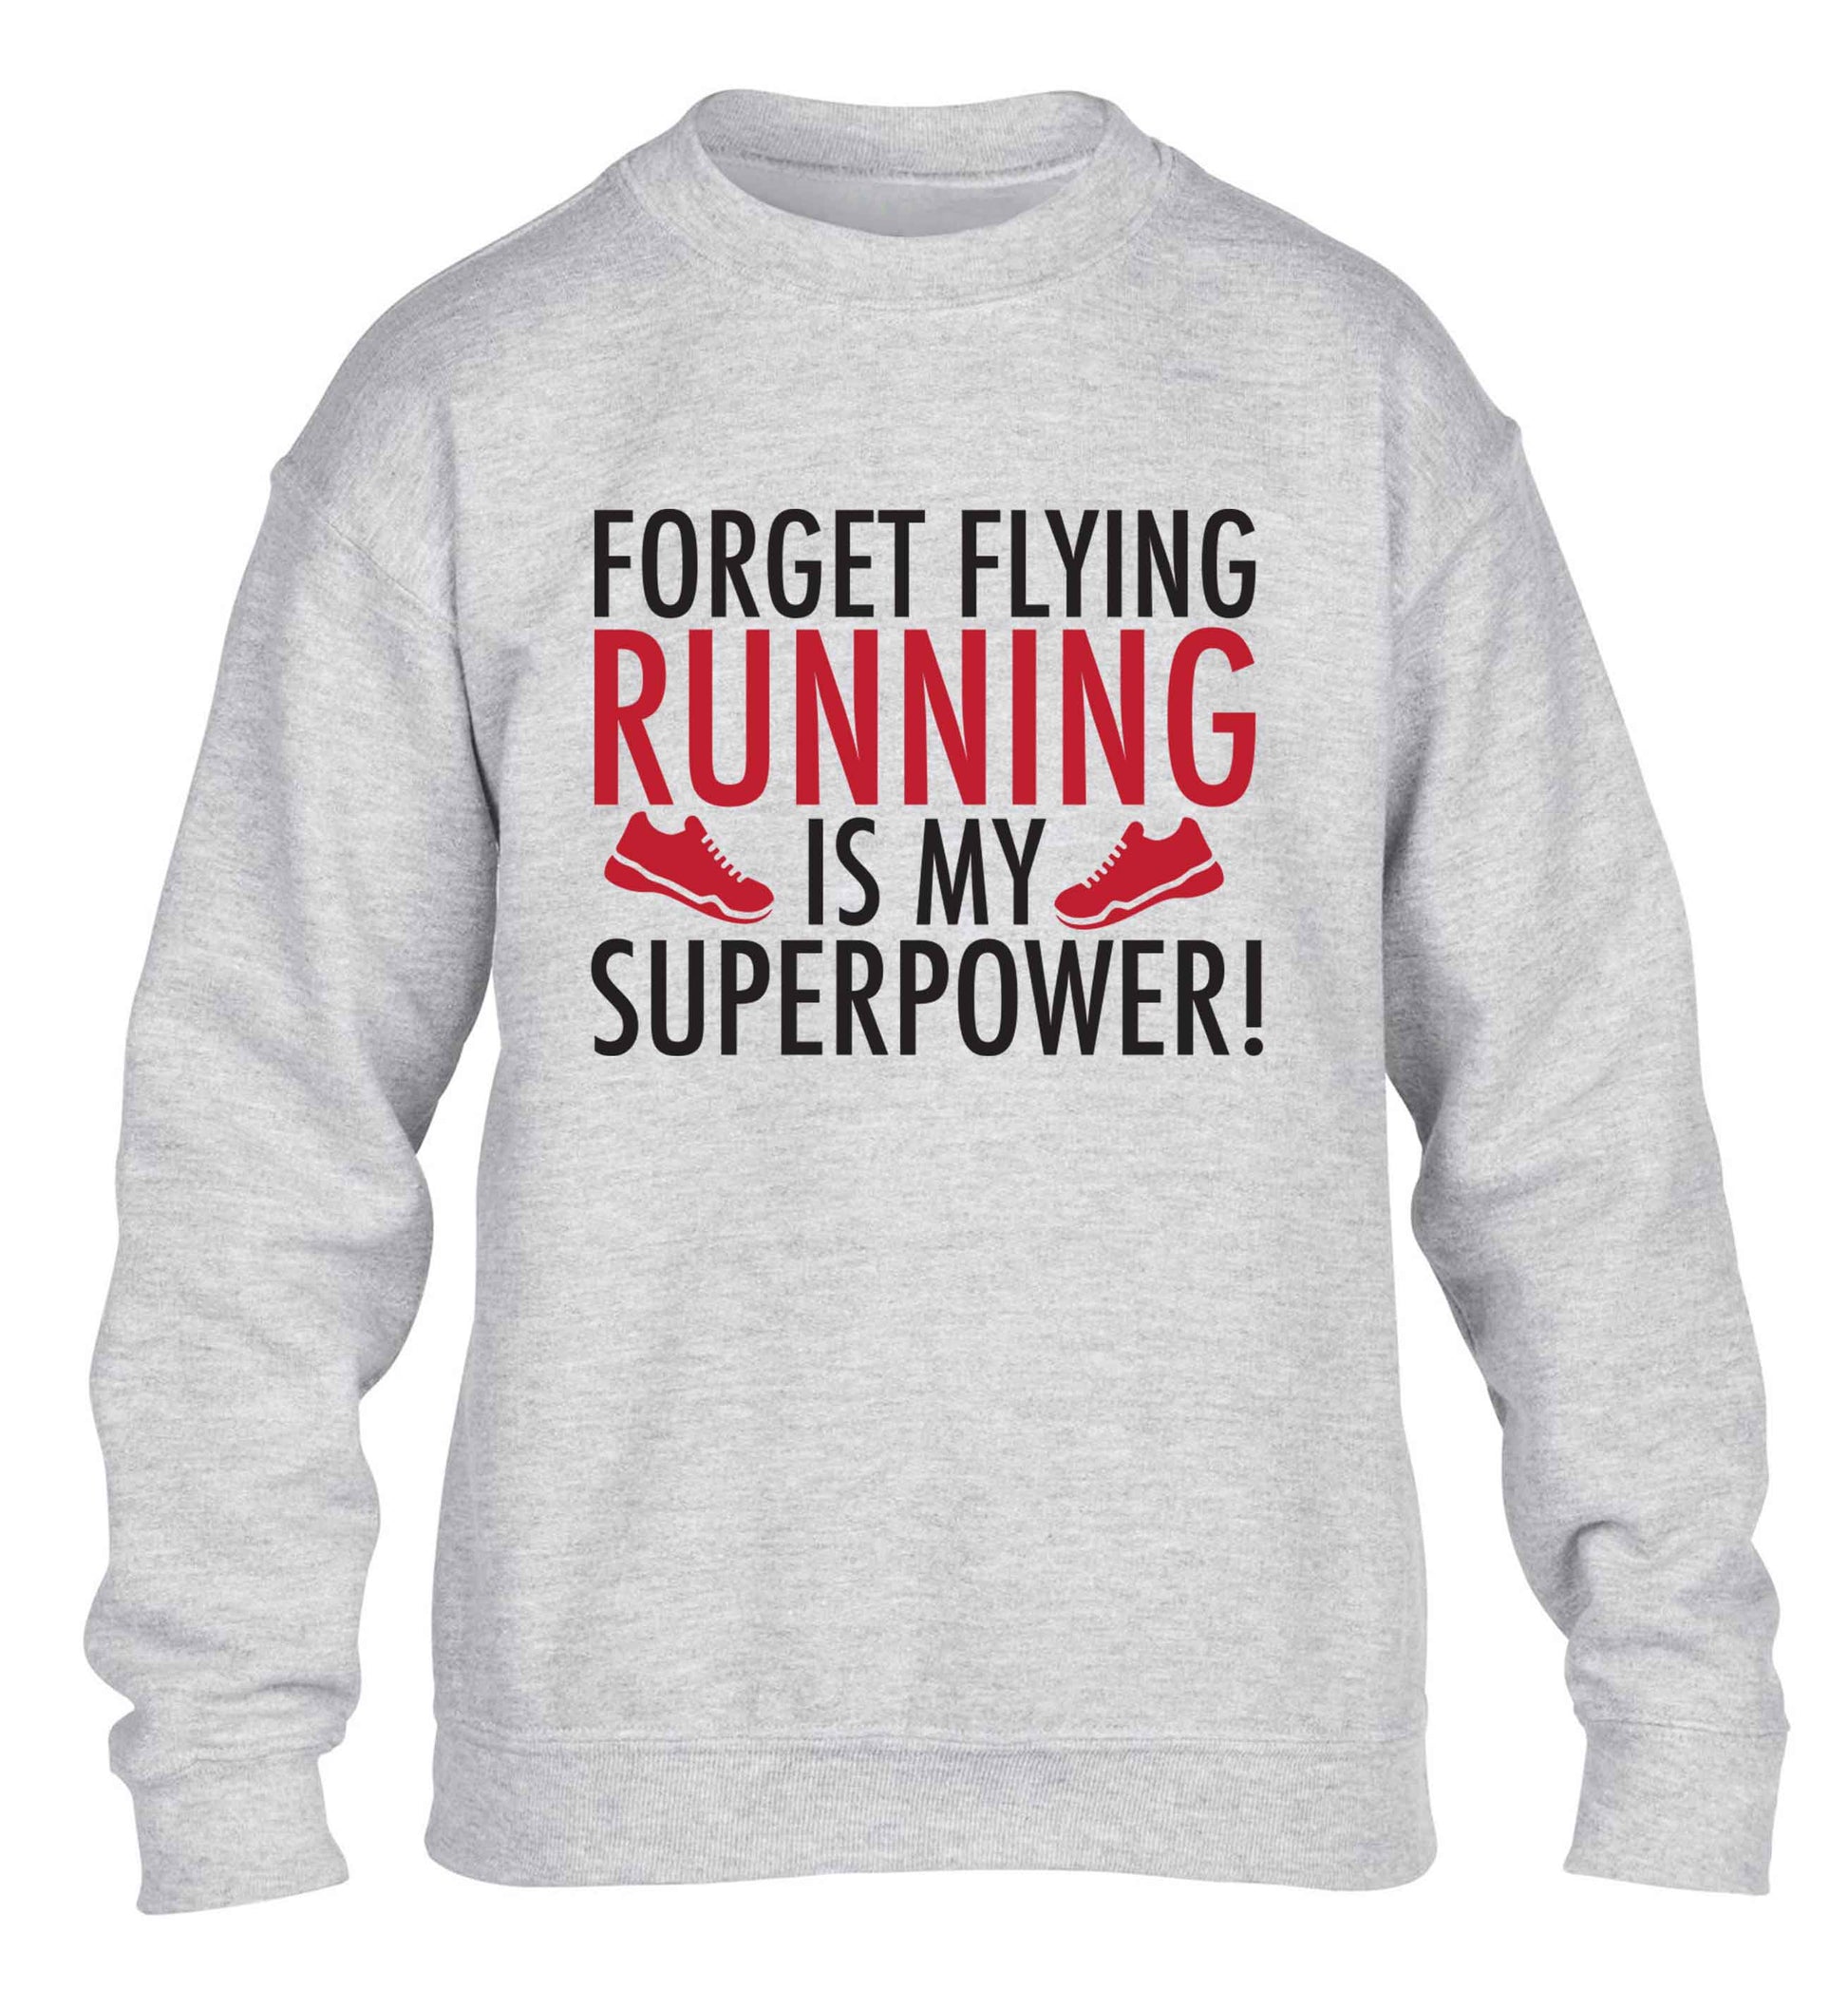 Forget flying running is my superpower children's grey sweater 12-13 Years